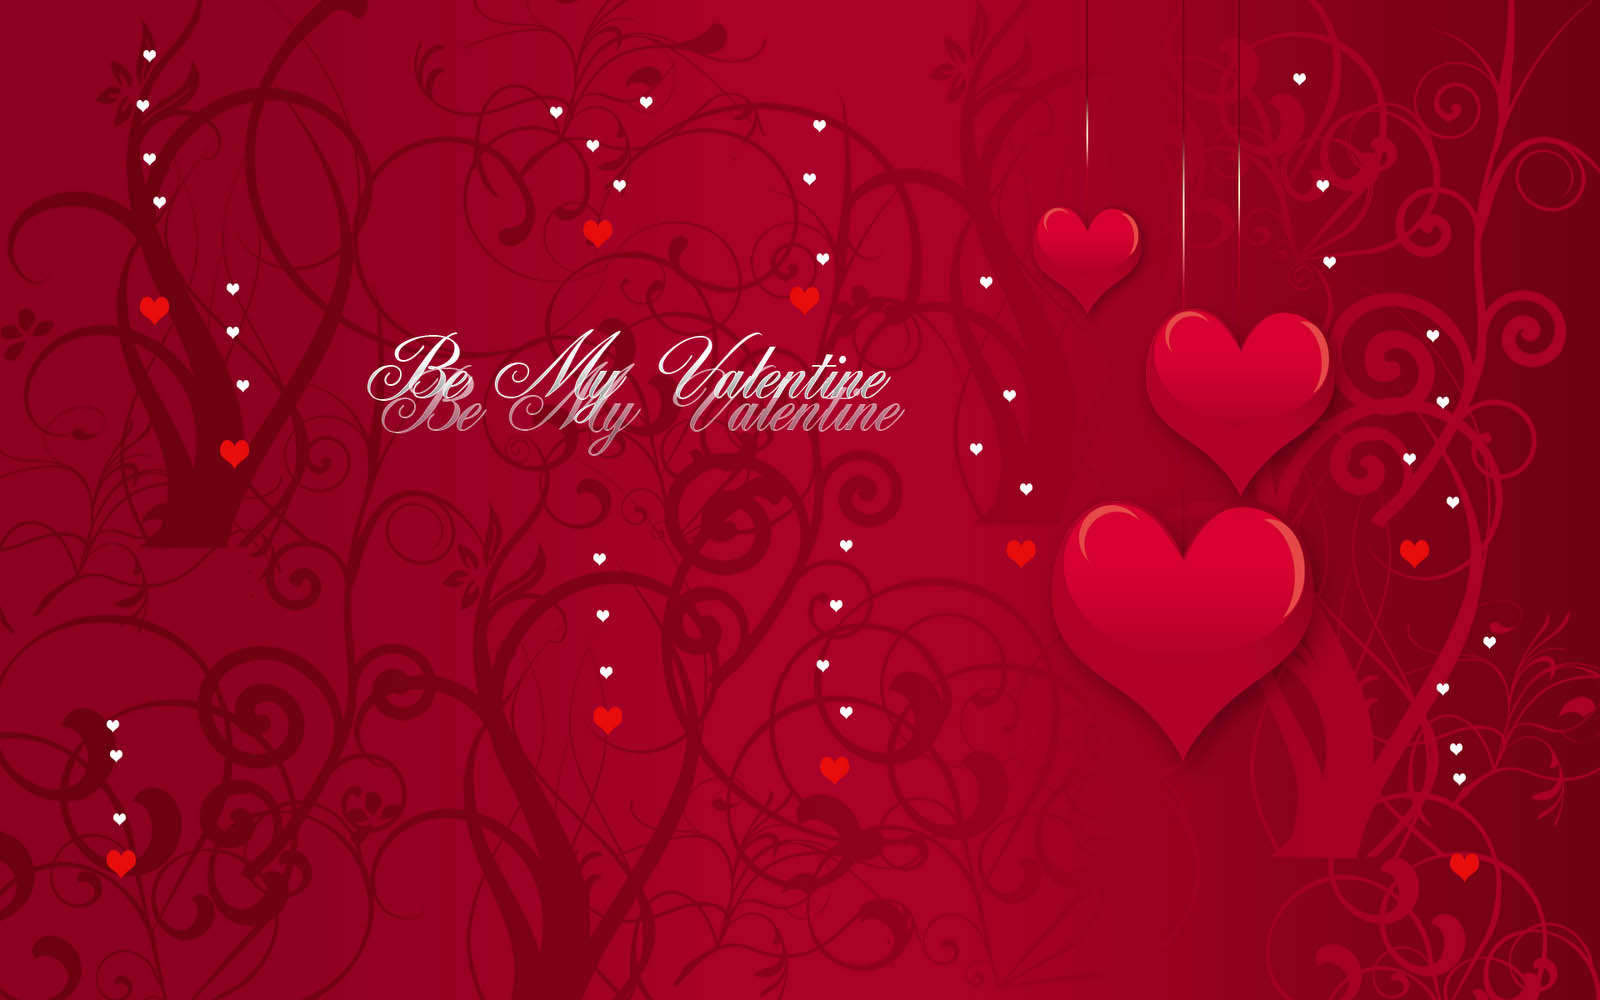 Tag Valentines Day Desktop Wallpaper Image Photos Pictures And